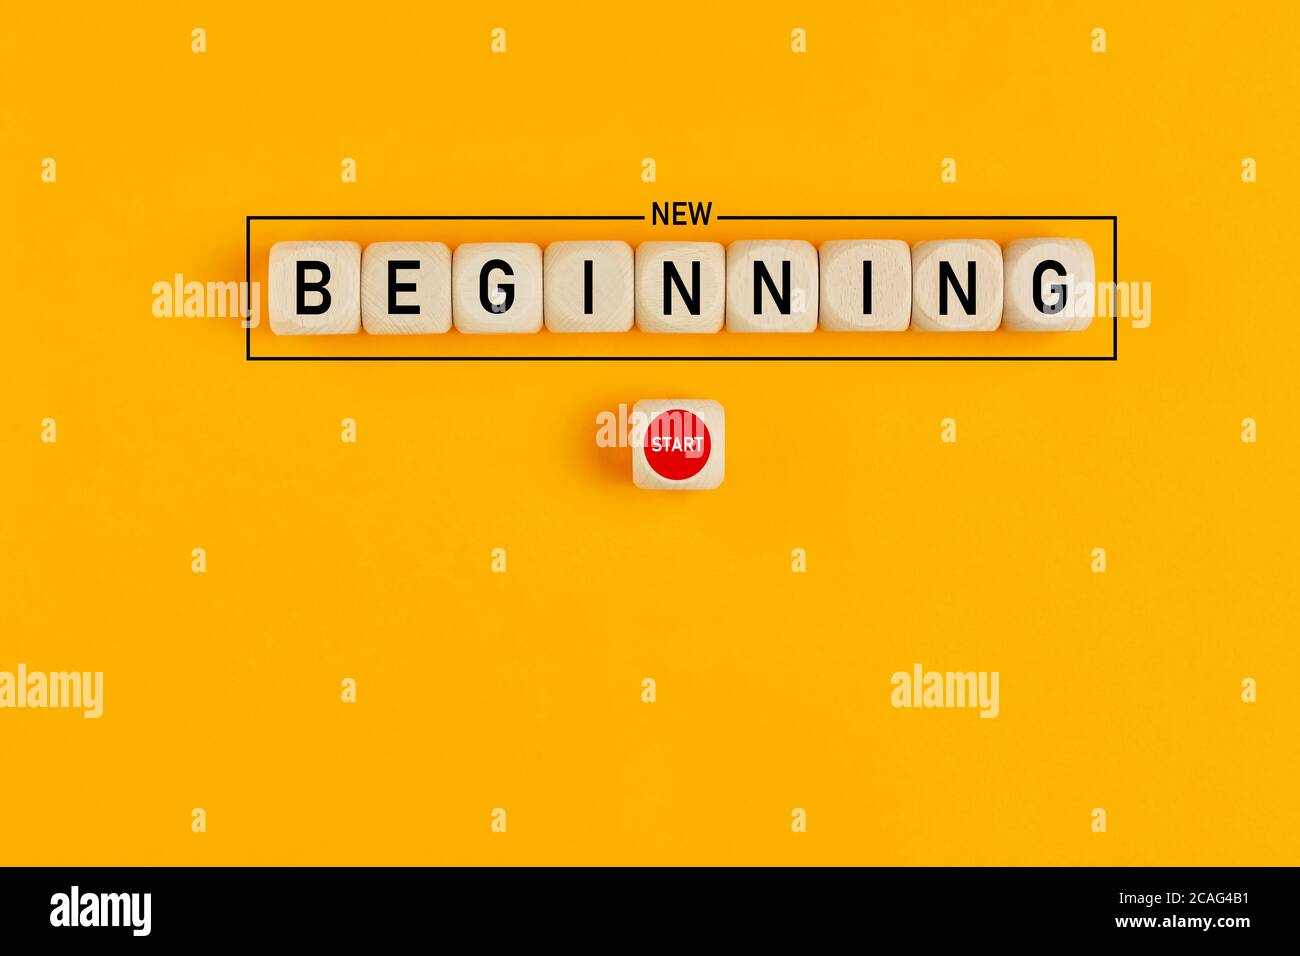 Starting a new beginning concept. The word new beginning on wooden cubes with a start button on yellow background. Stock Photo